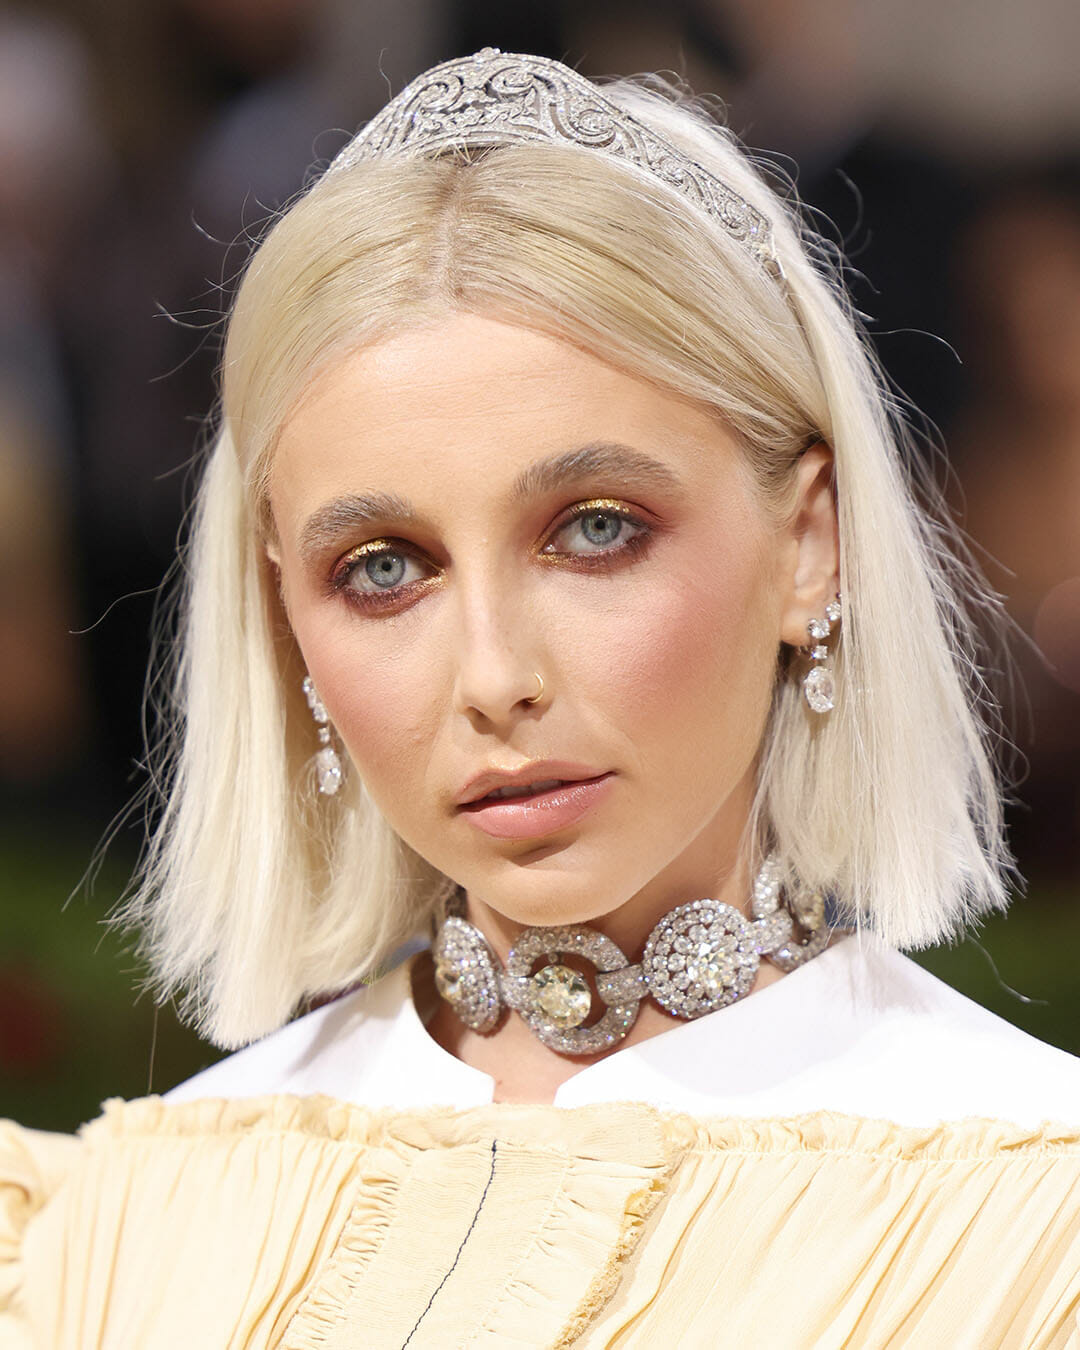 Emma Chamberlain wears Indian King's diamond necklace to Met Gala 2022;  here's why it's problematic - Entertainment News